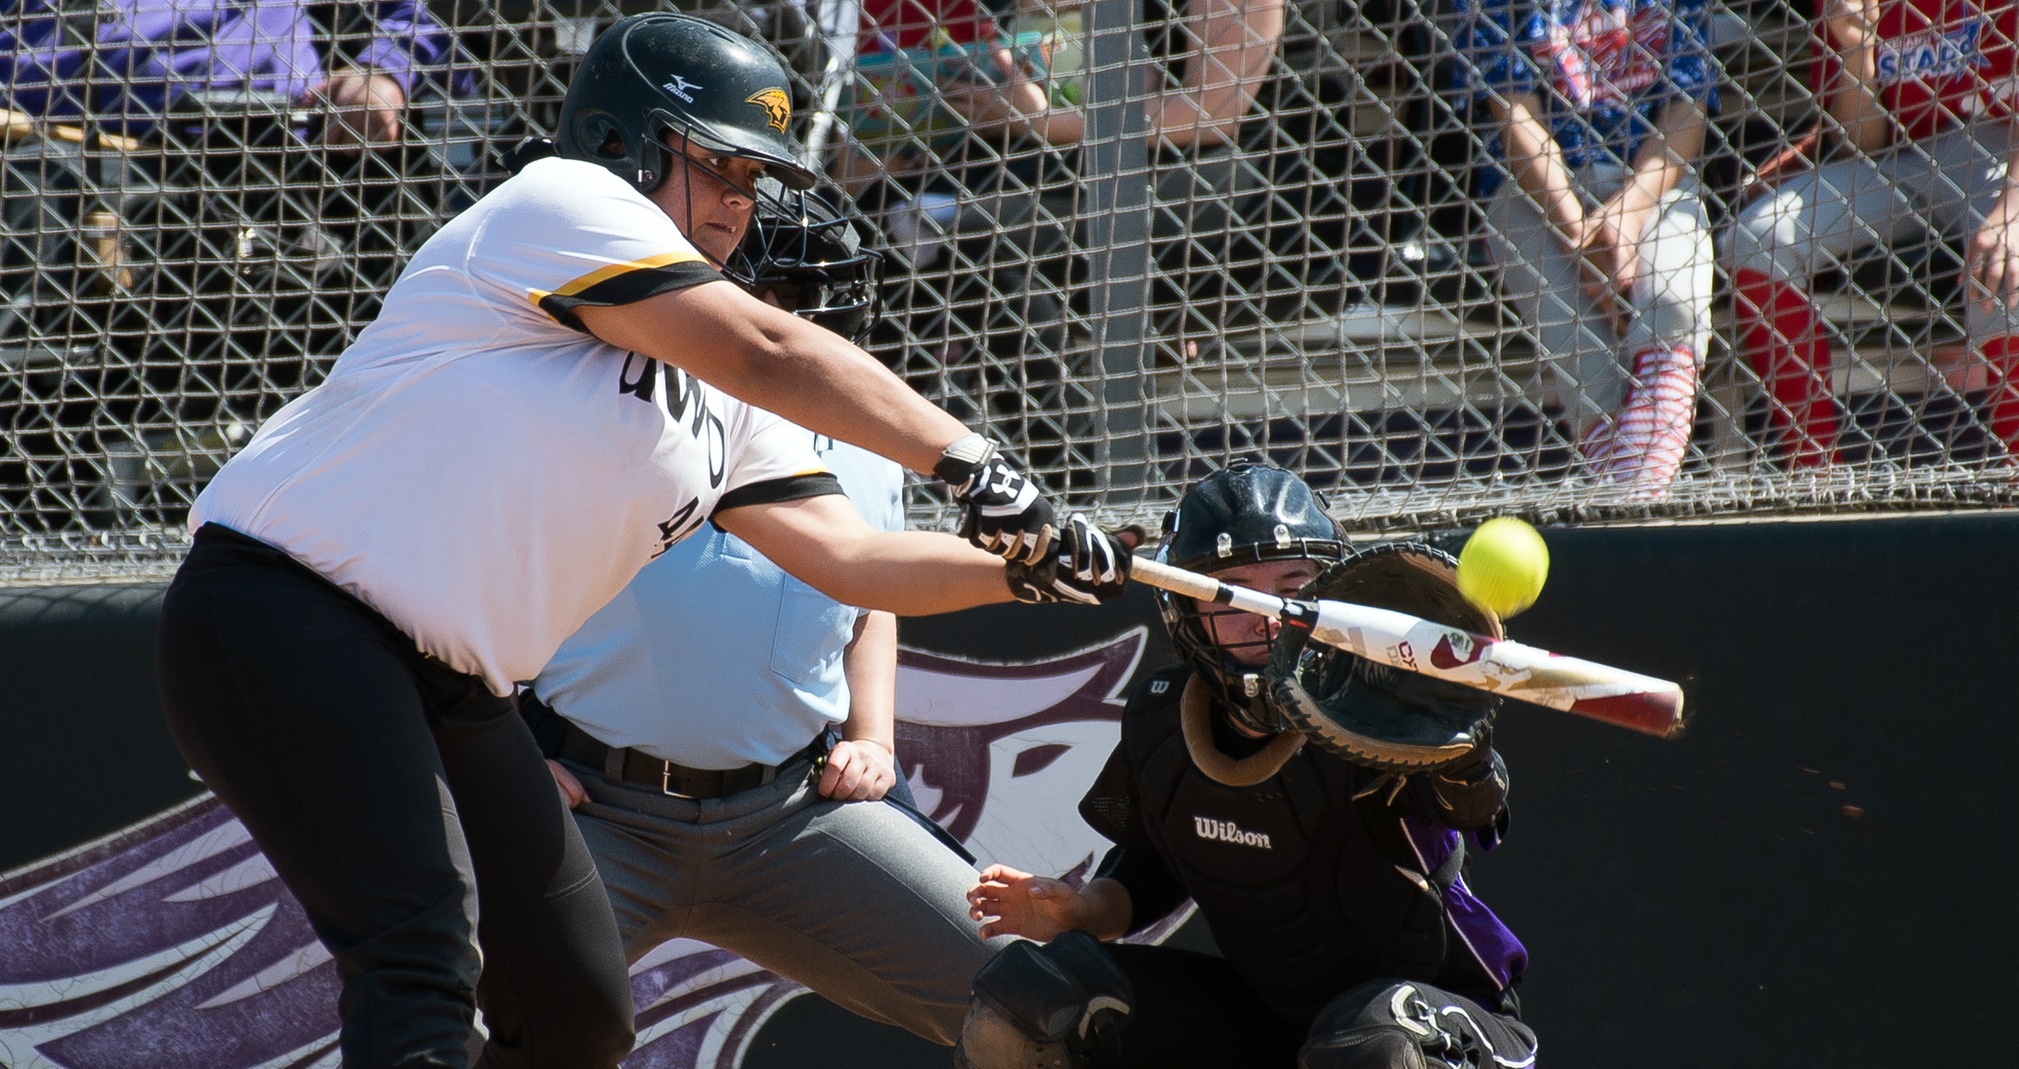 Kaitlyn Krol homered and drove in three runs against the Warhawks.